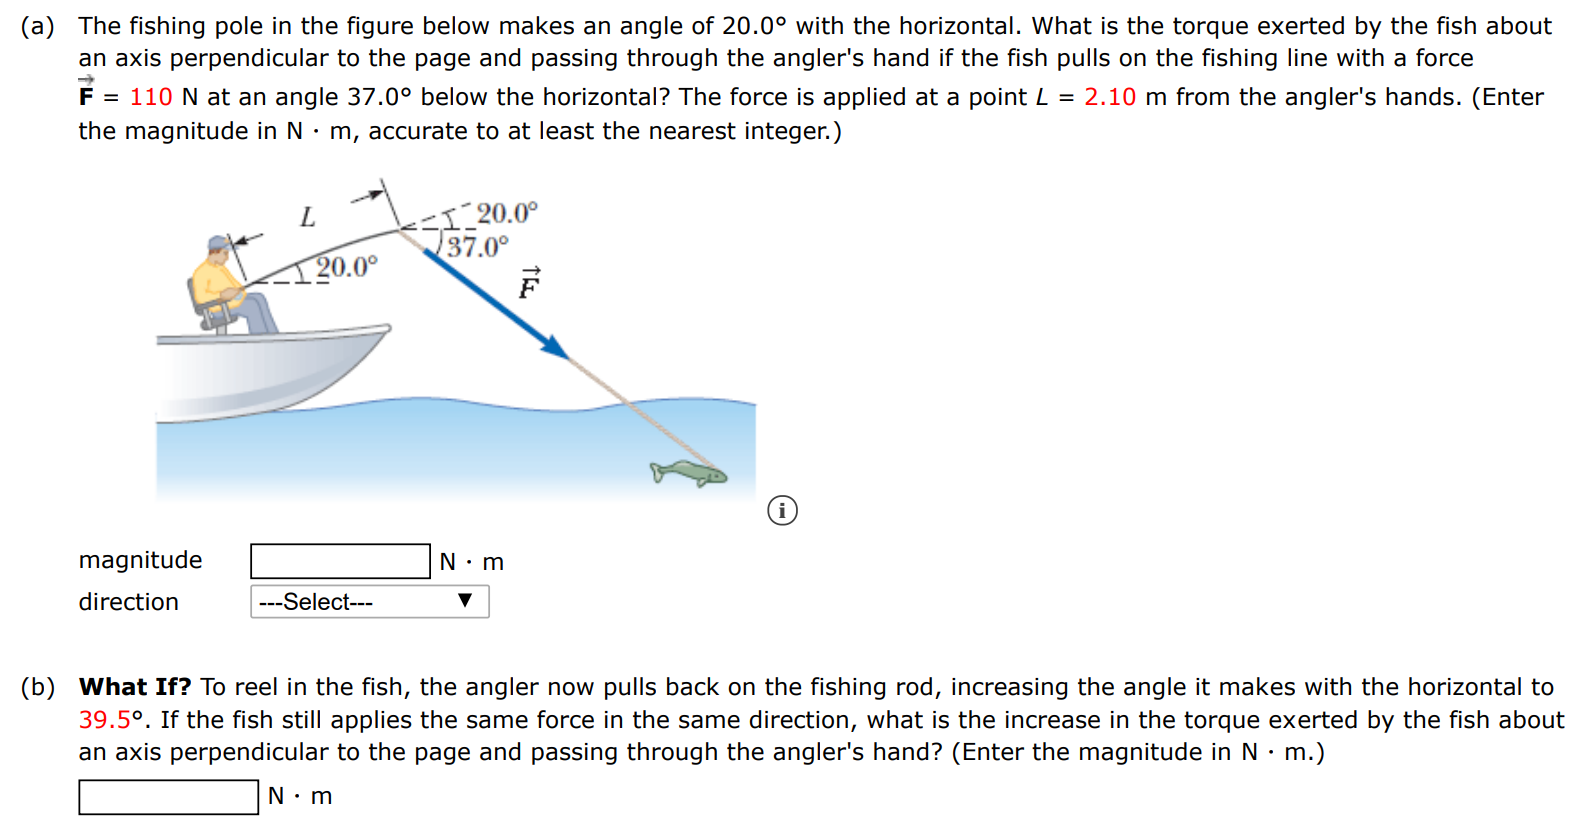 (a) The fishing pole in the figure below makes an angle of 20.0∘ with the horizontal. What is the torque exerted by the fish about an axis perpendicular to the page and passing through the angler's hand if the fish pulls on the fishing line with a force F→ = 110 N at an angle 37.0∘ below the horizontal? The force is applied at a point L = 2.10 m from the angler's hands. (Enter the magnitude in N⋅m, accurate to at least the nearest integer. ) (i) (b) What If? To reel in the fish, the angler now pulls back on the fishing rod, increasing the angle it makes with the horizontal to 39.5∘. If the fish still applies the same force in the same direction, what is the increase in the torque exerted by the fish about an axis perpendicular to the page and passing through the angler's hand? (Enter the magnitude in N⋅m.) N⋅m 